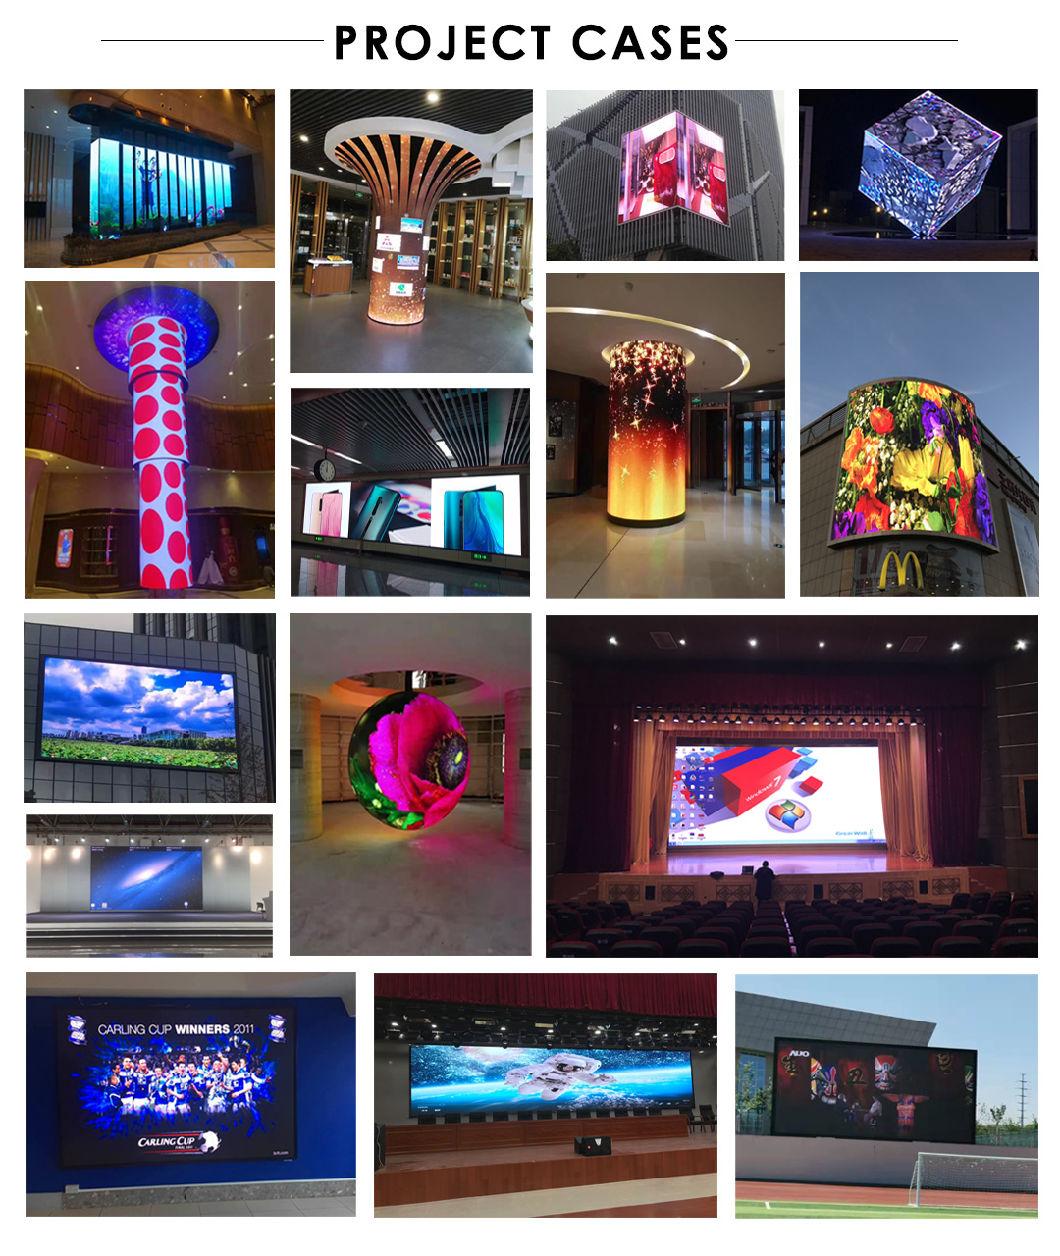 Transparent Screen LED Display Full Color for Indoor Outdoor Advertising Window 3.91-7.81mm